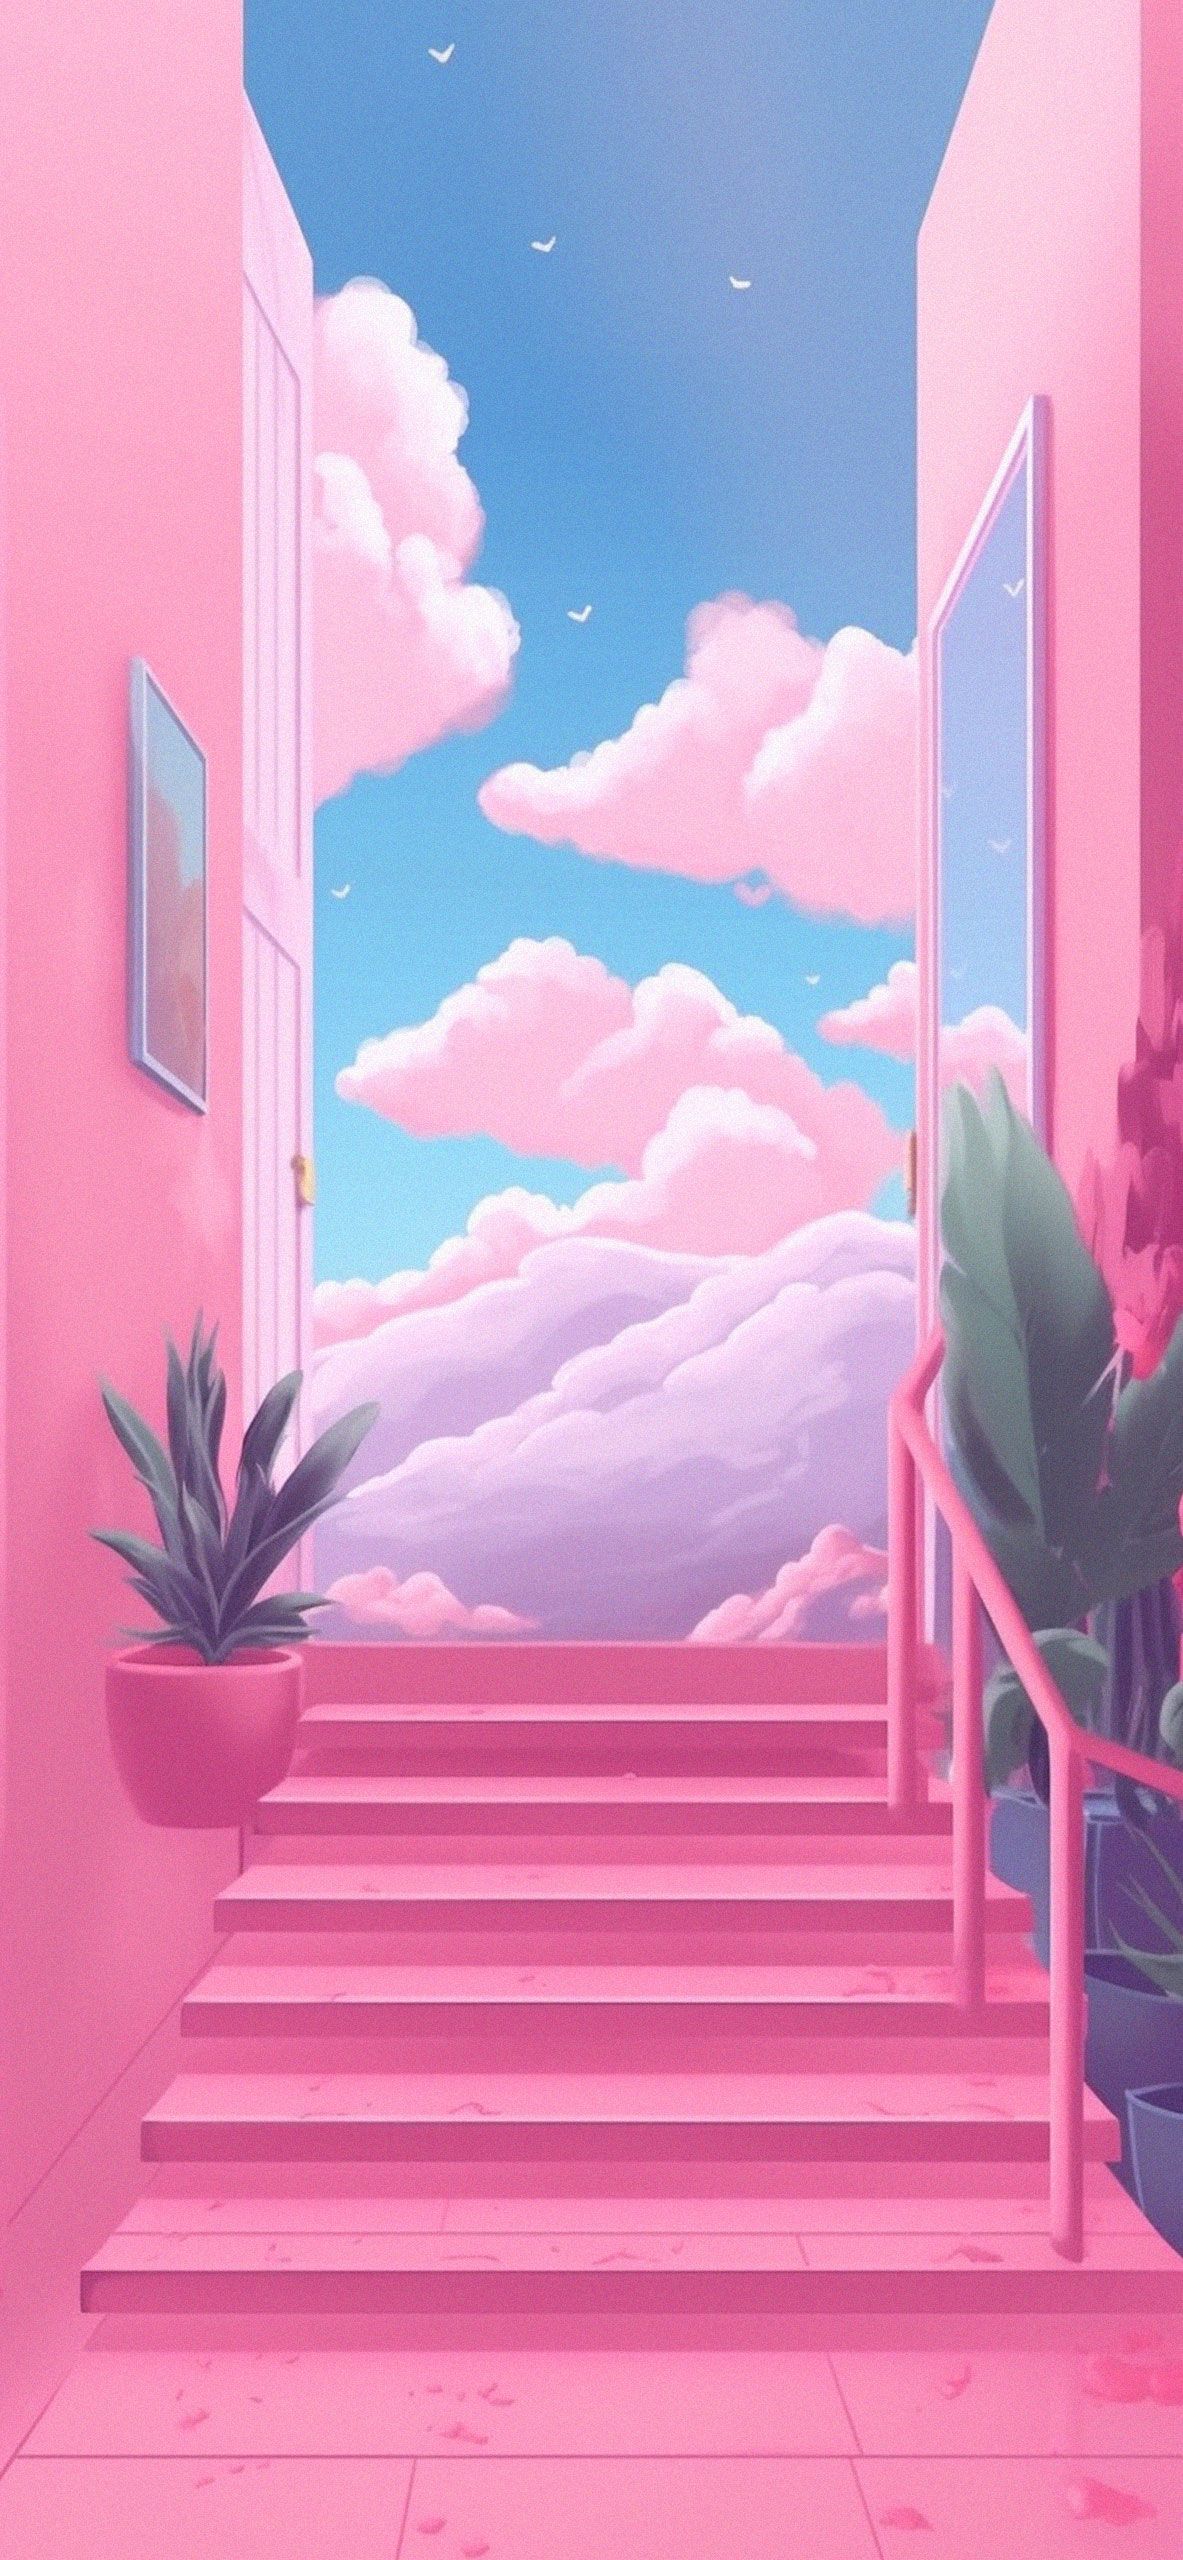 A pink staircase leads to a door with a sky background - Trippy, psychedelic